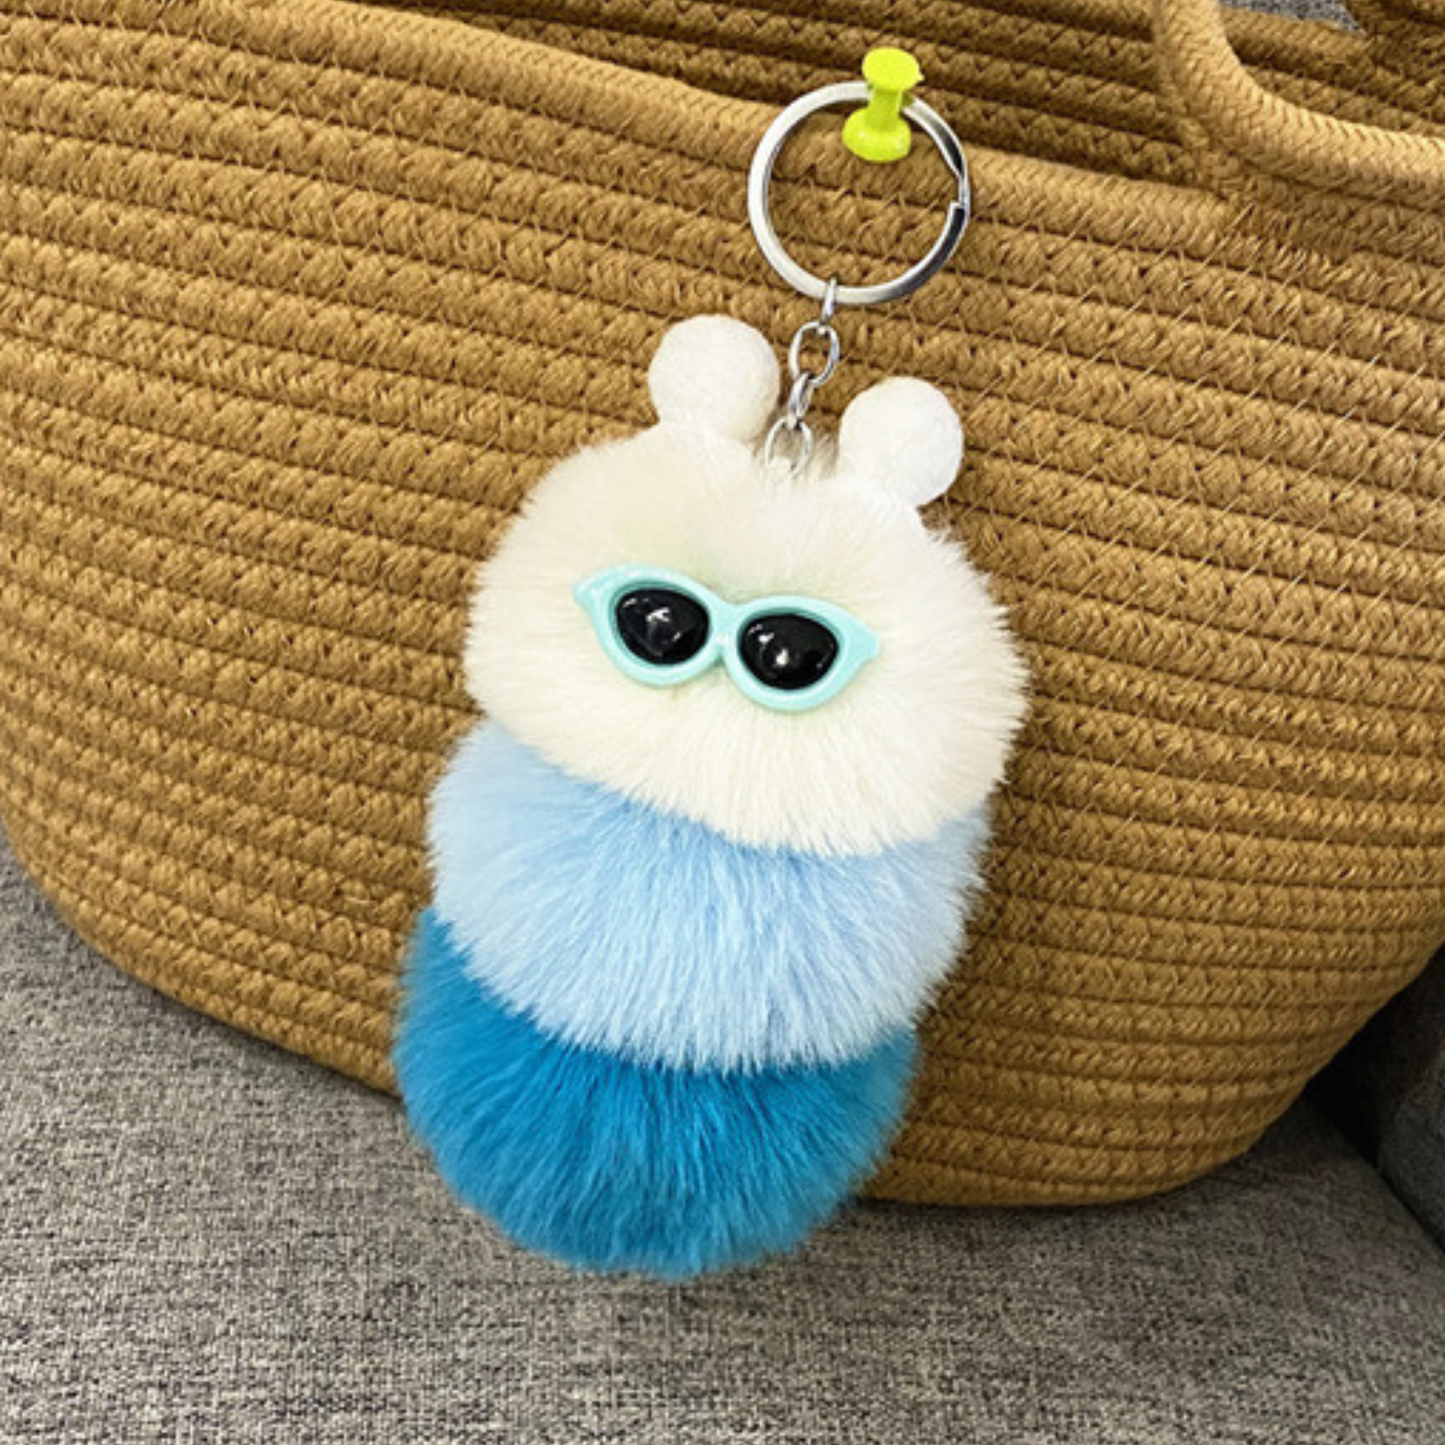 furry friend keychain in white and blue